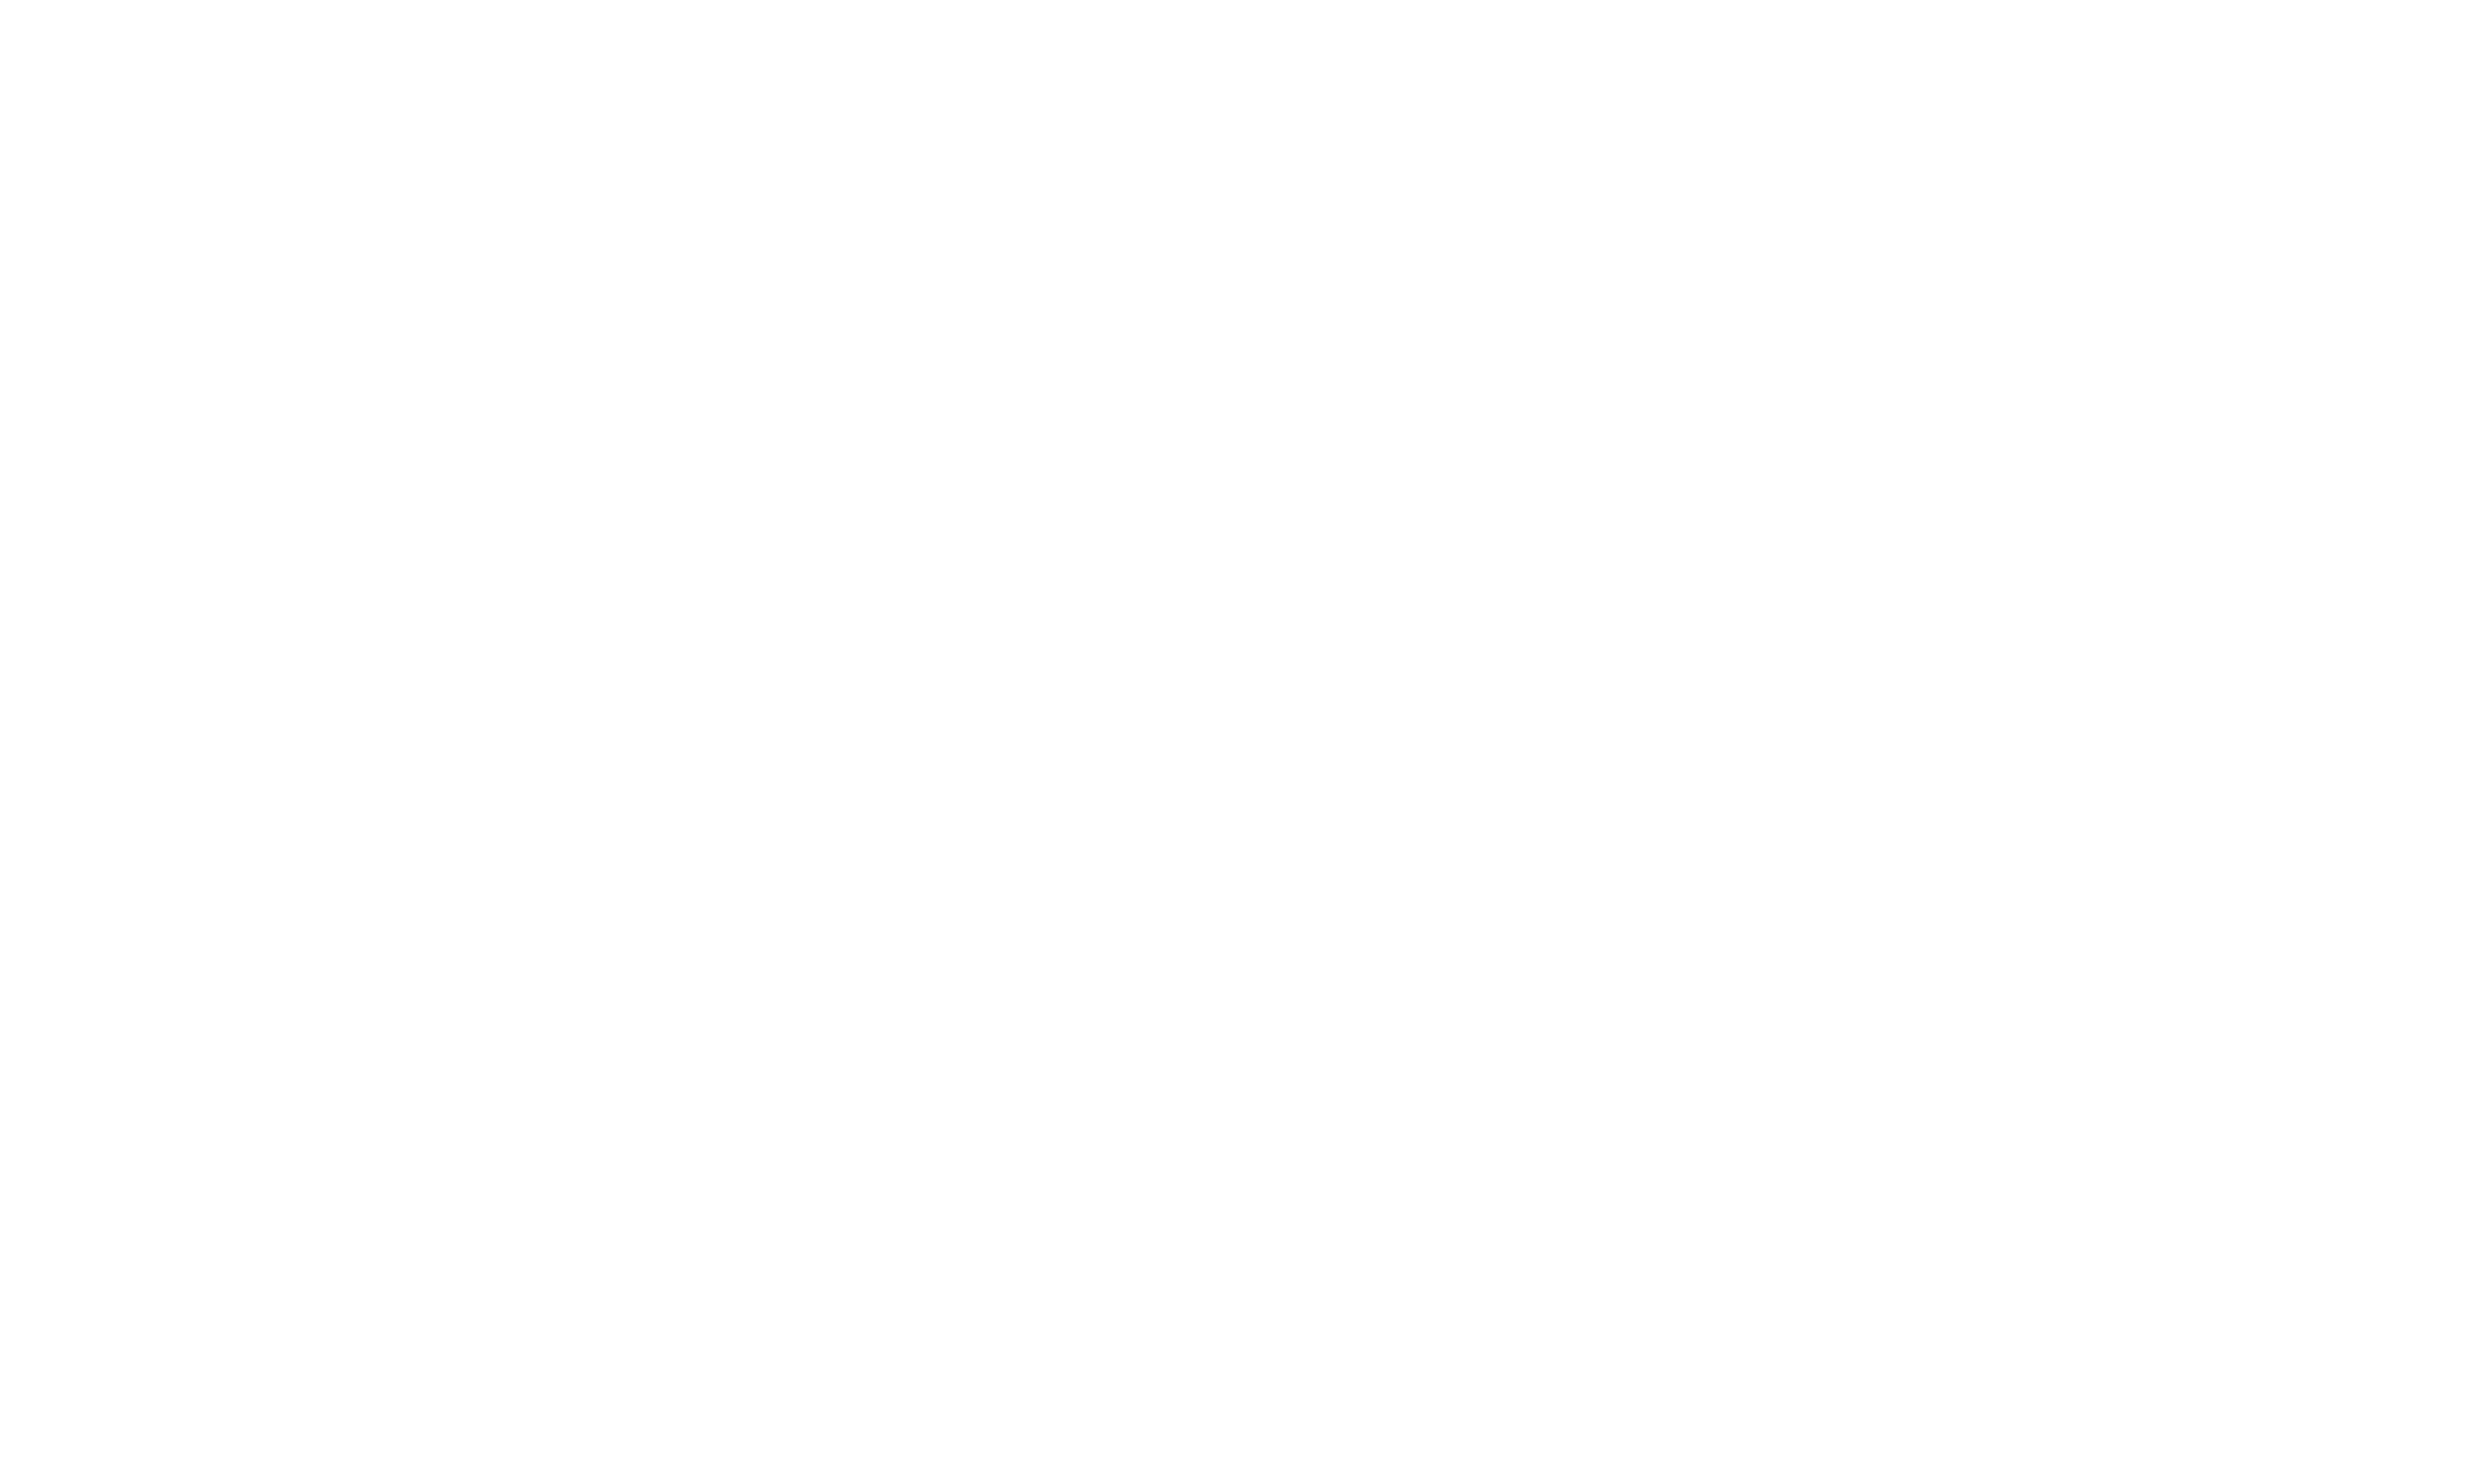 CHINESE_Simplified_white logo RGC BEVERAGES